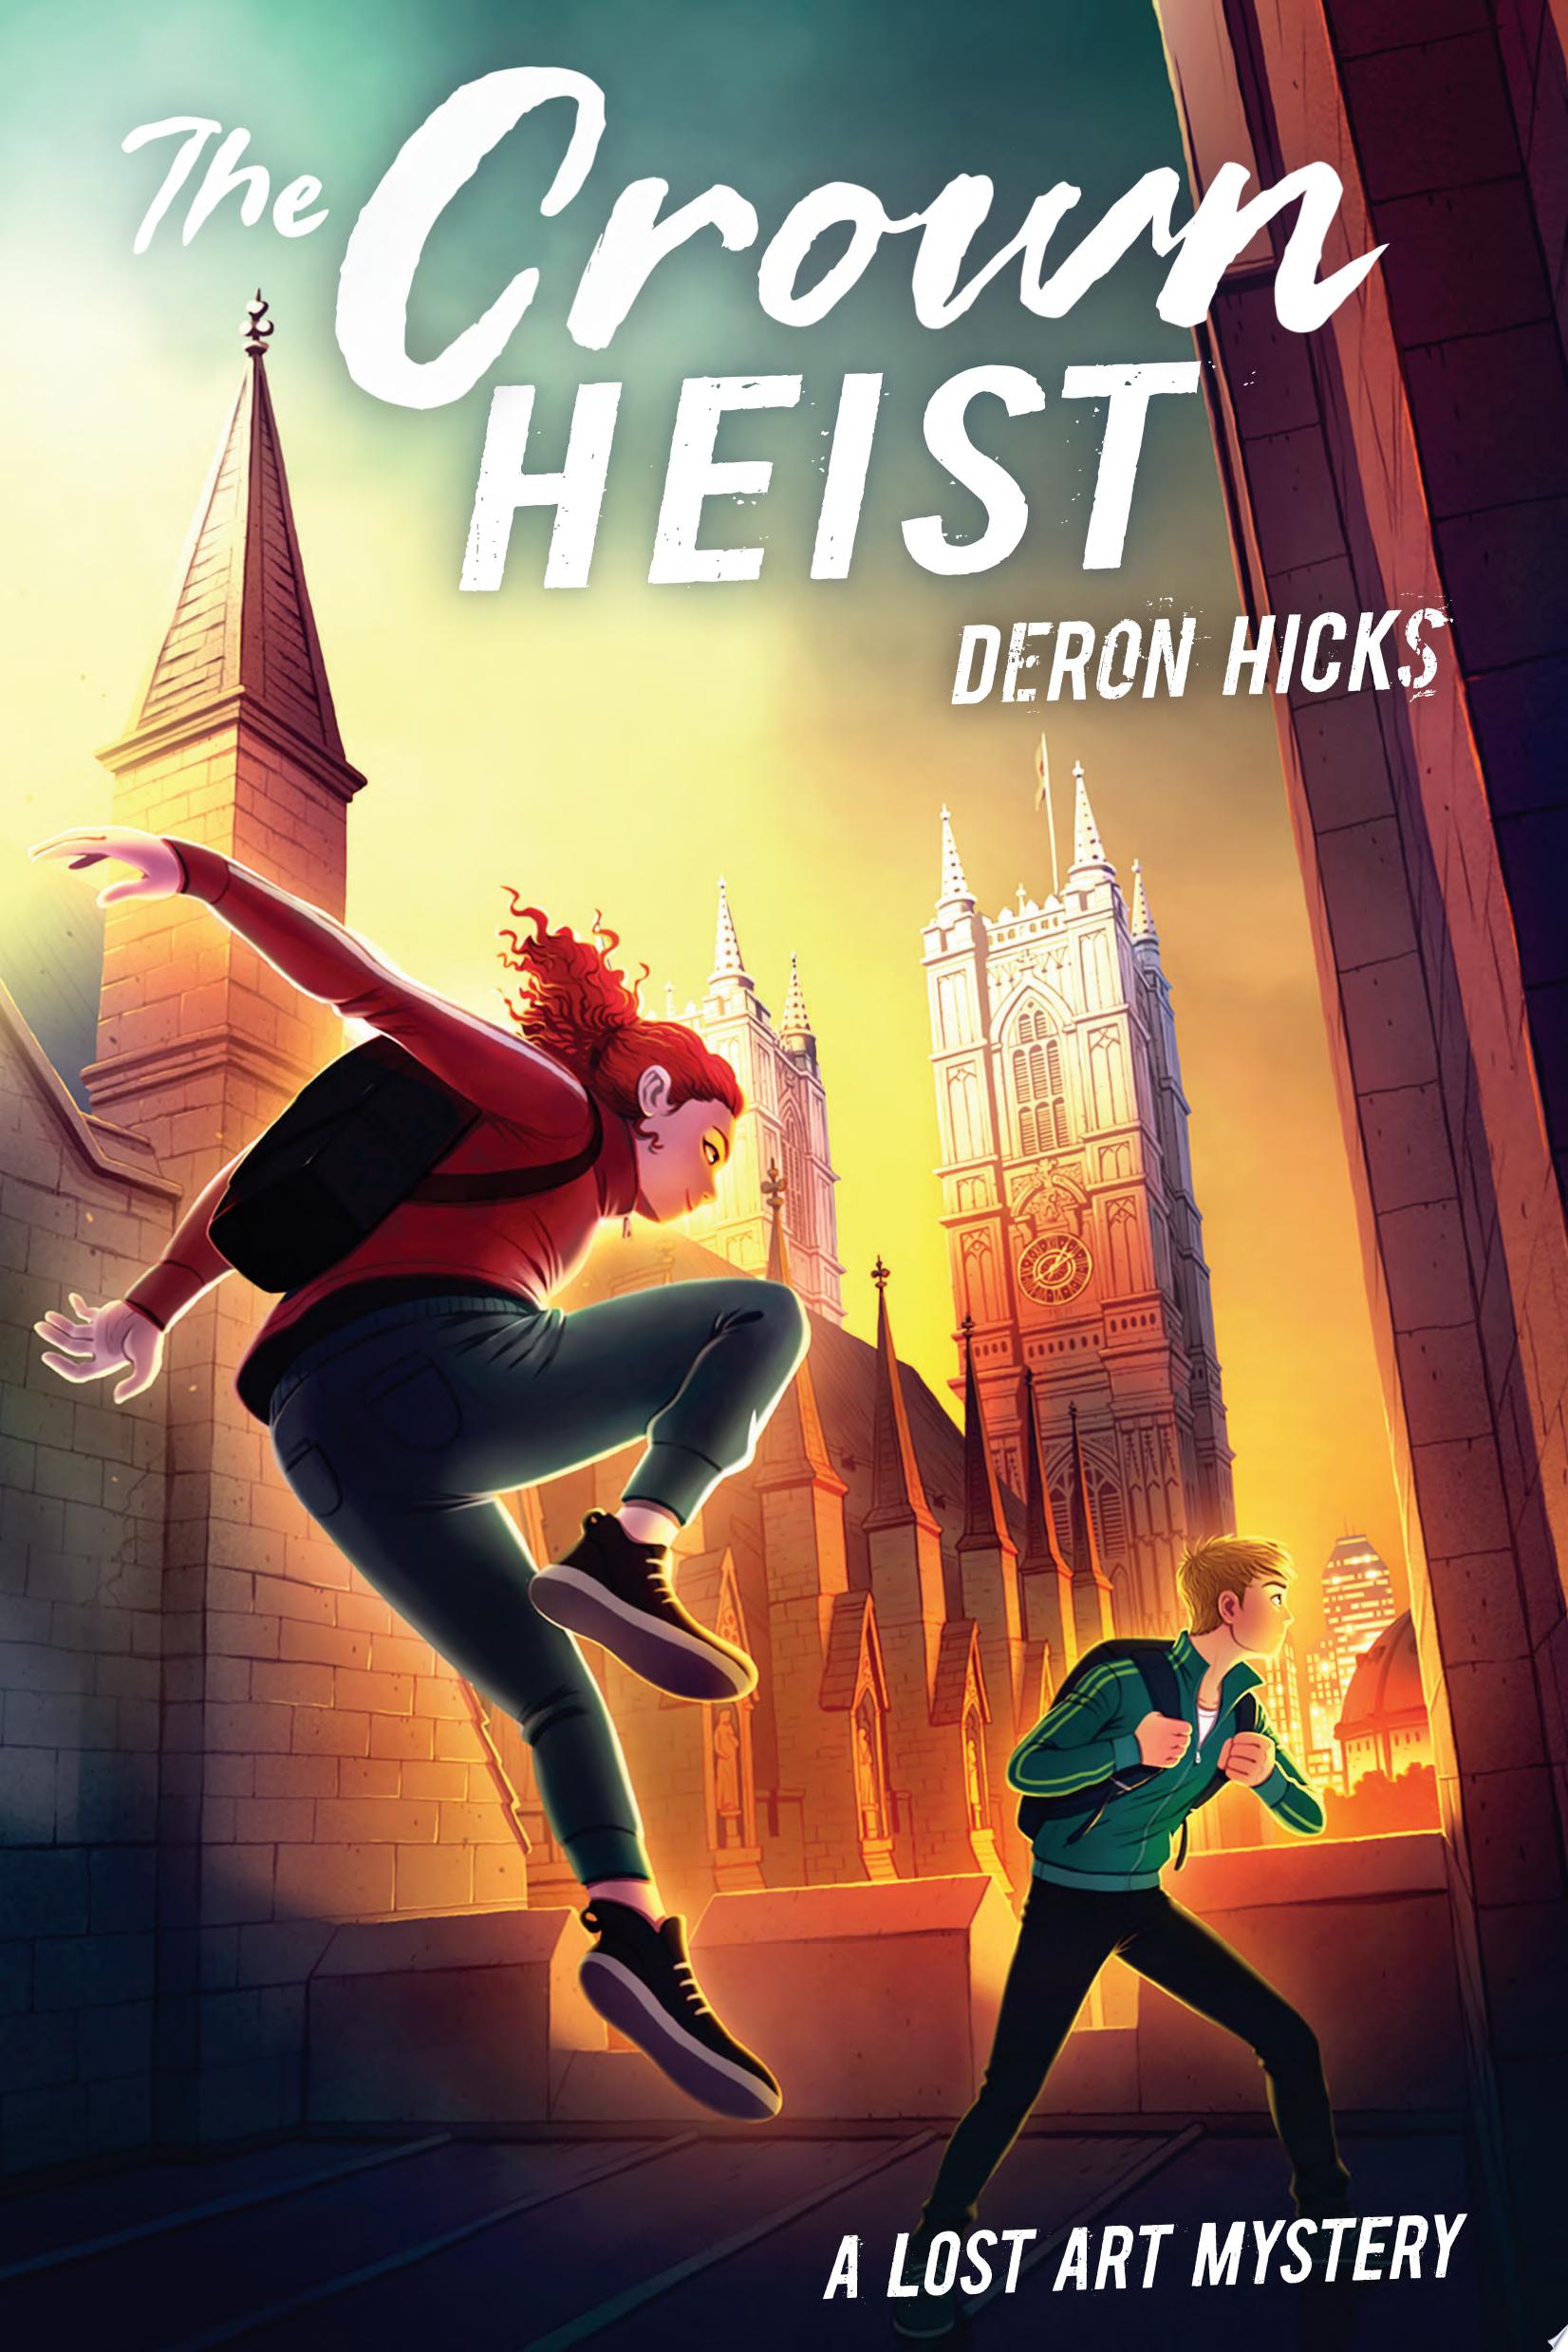 Image for "The Crown Heist"